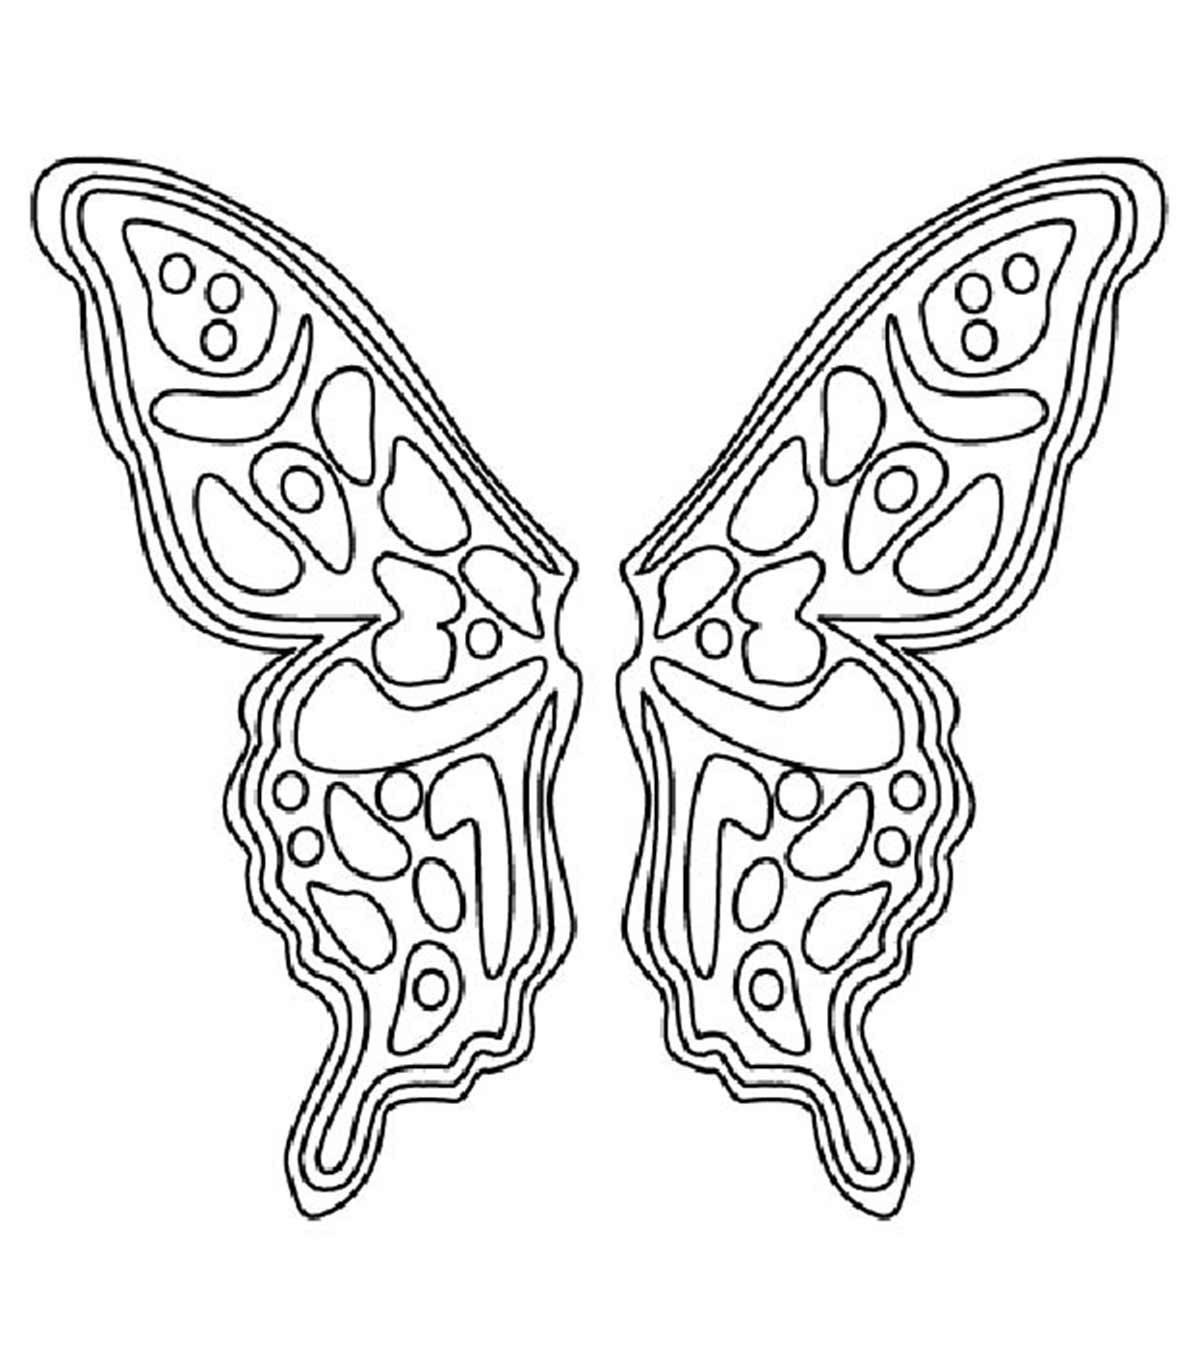 86 Top Momjunction Butterfly Coloring Pages  Images